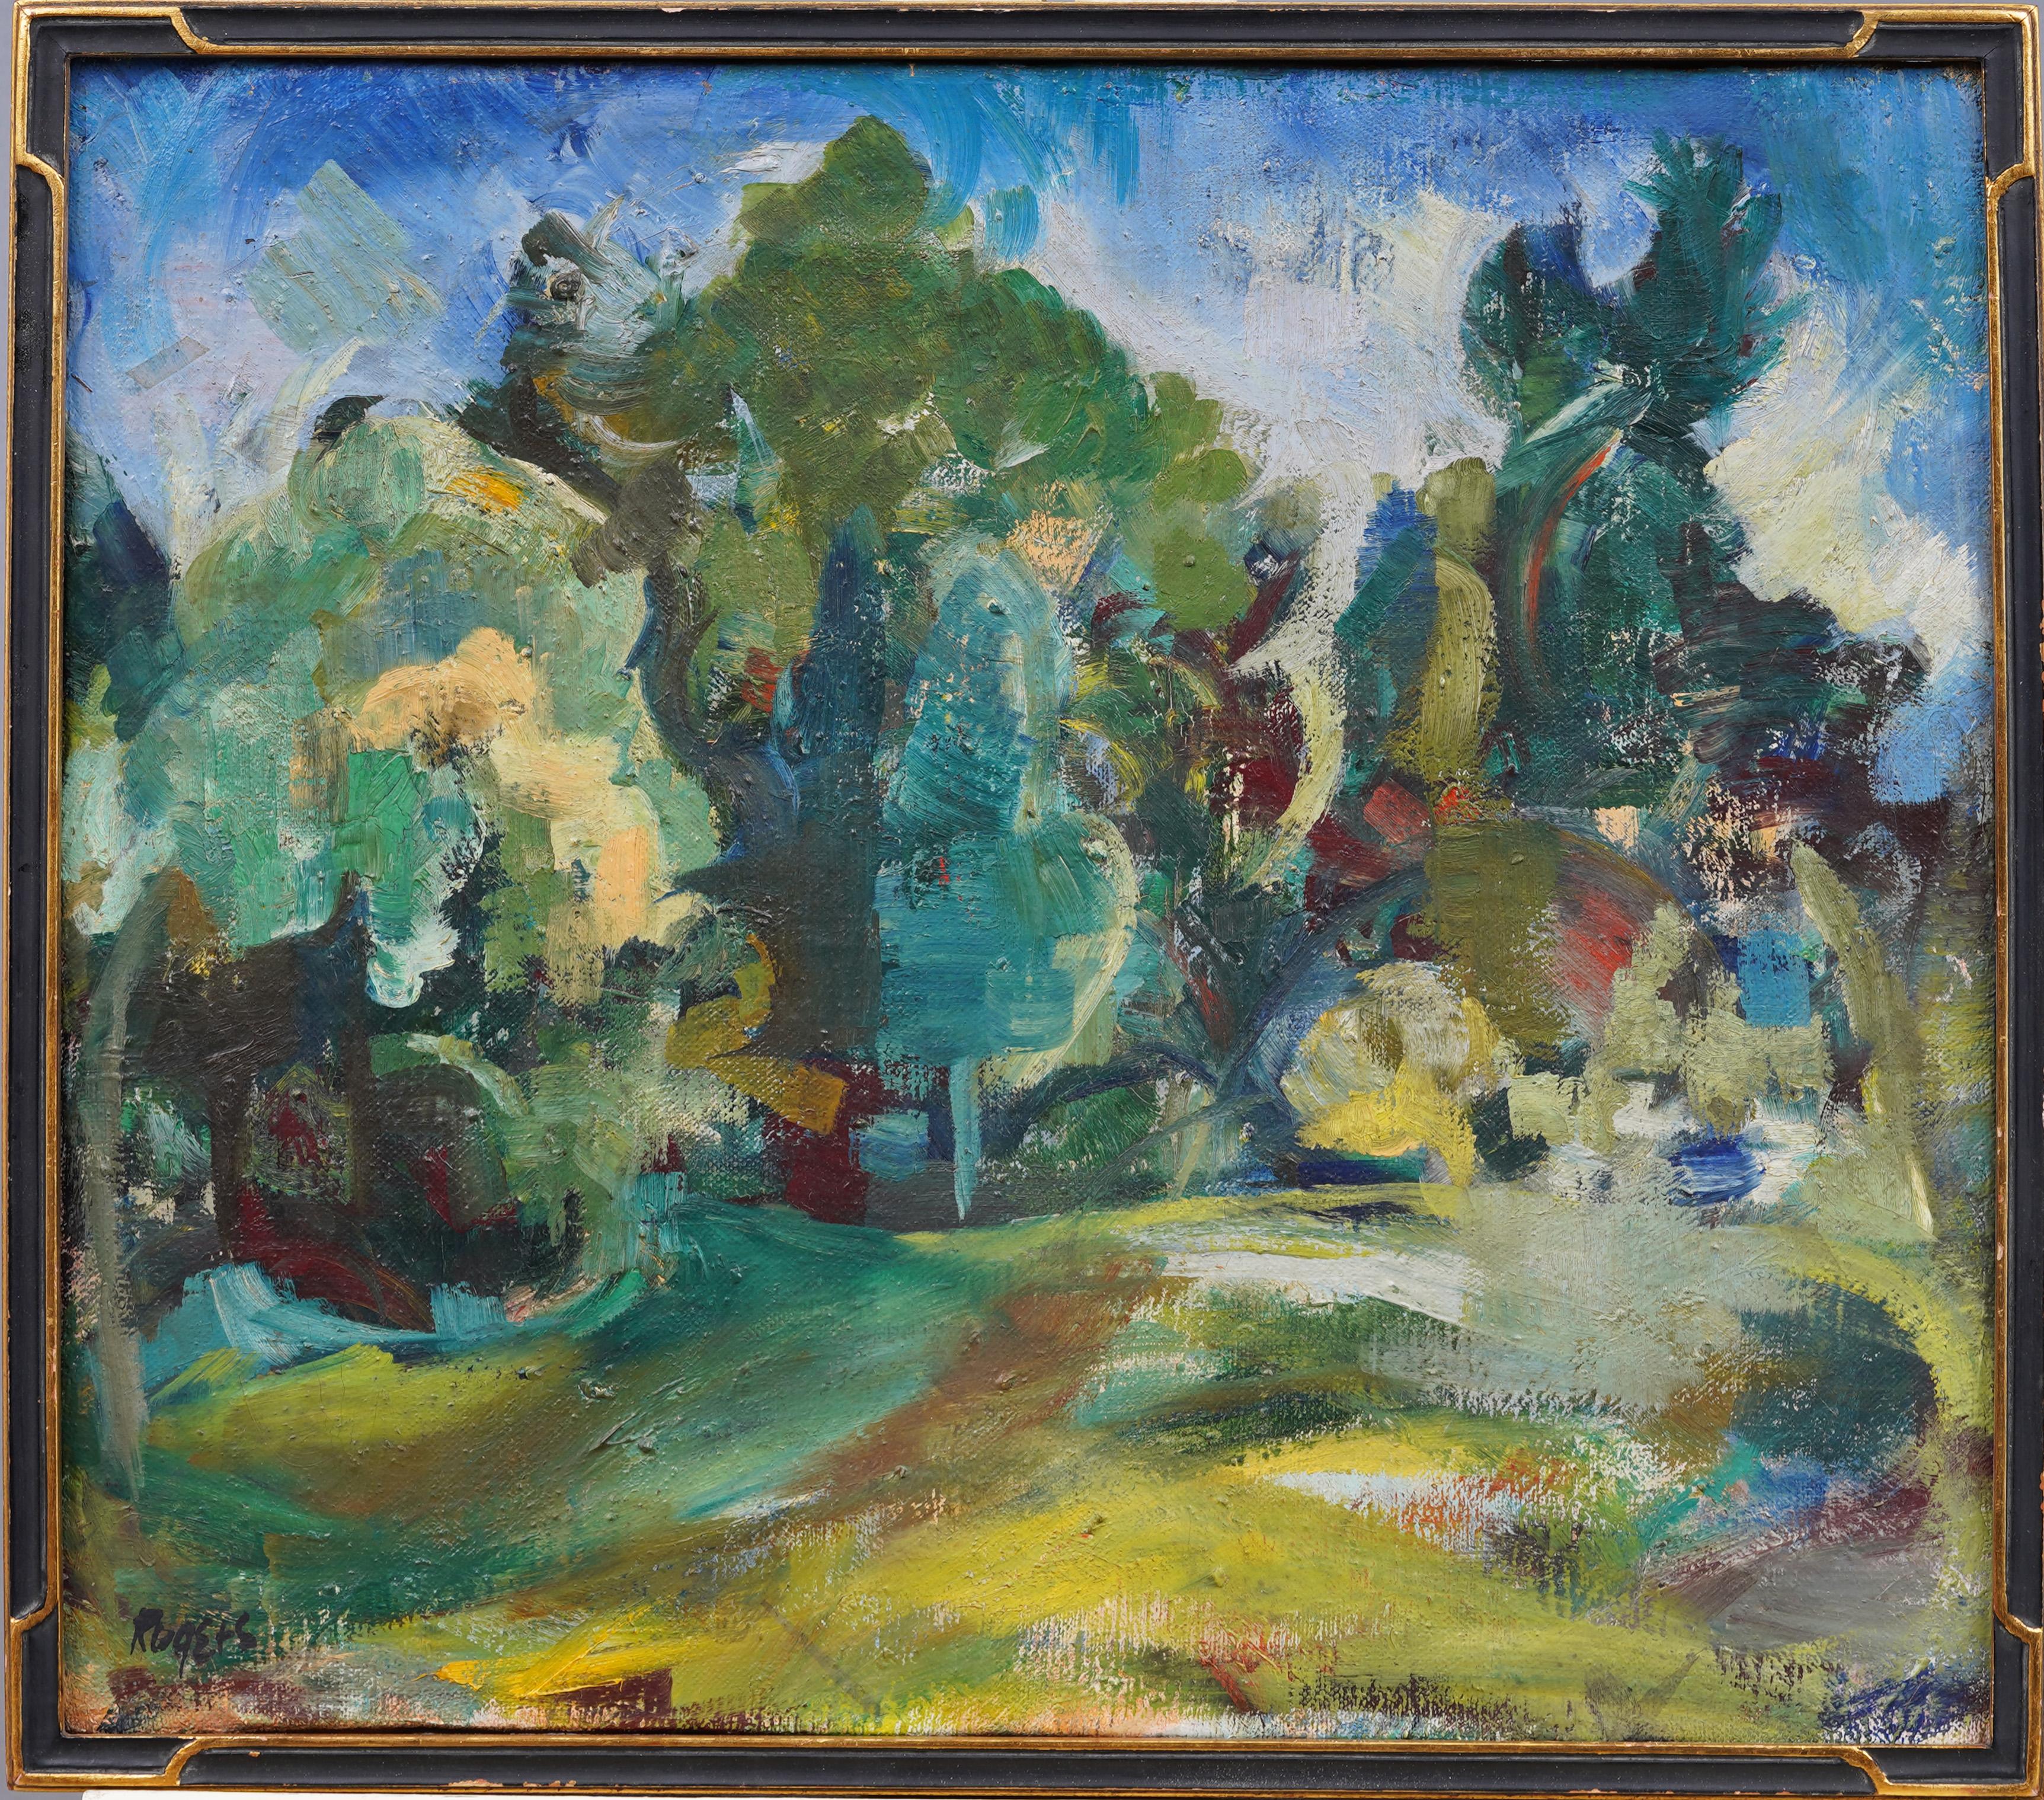 Nicely painted early American modernist landscape by Rita Rogers (b.1936). 
 Oil on canvas.  Framed. Signed.  Artist Bio:  Rita Rogers was born in North Miami Beach and raised in Brooklyn, NY. She studied at Bard College, Columbia, the Art Student’s